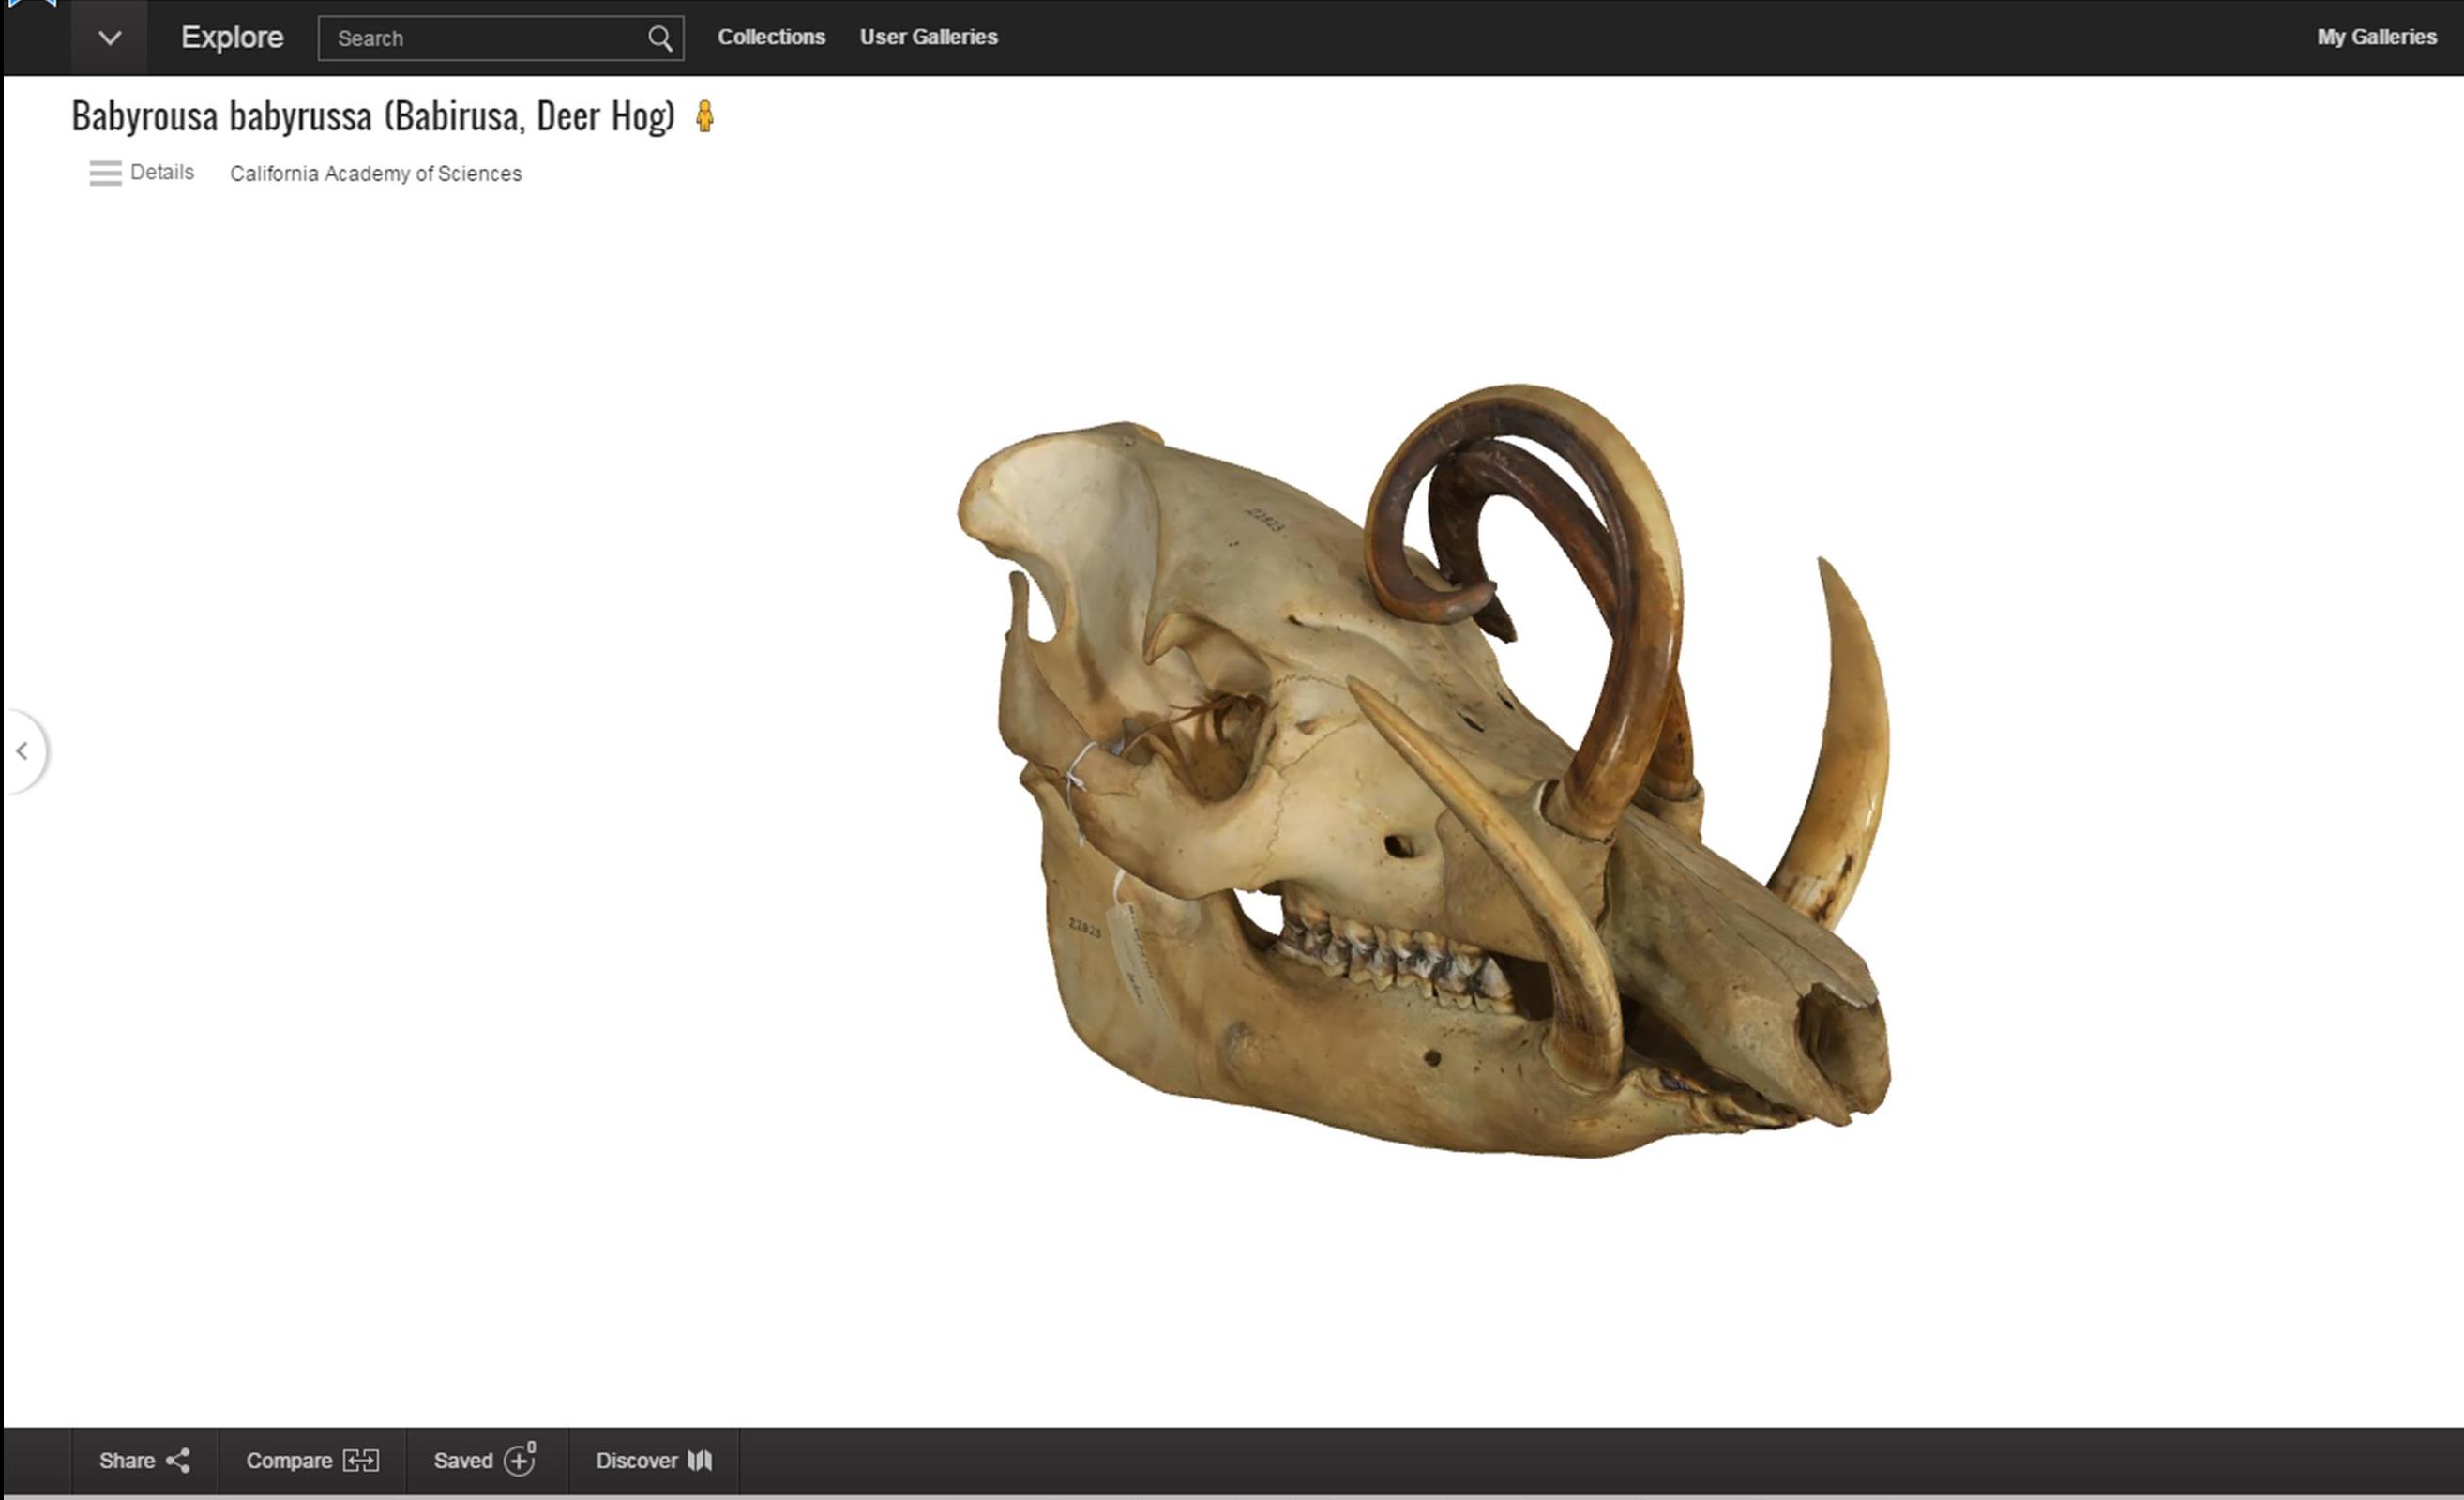 Google Art Project now has 3D objects from a variety of museums and galleries, including animal skulls!